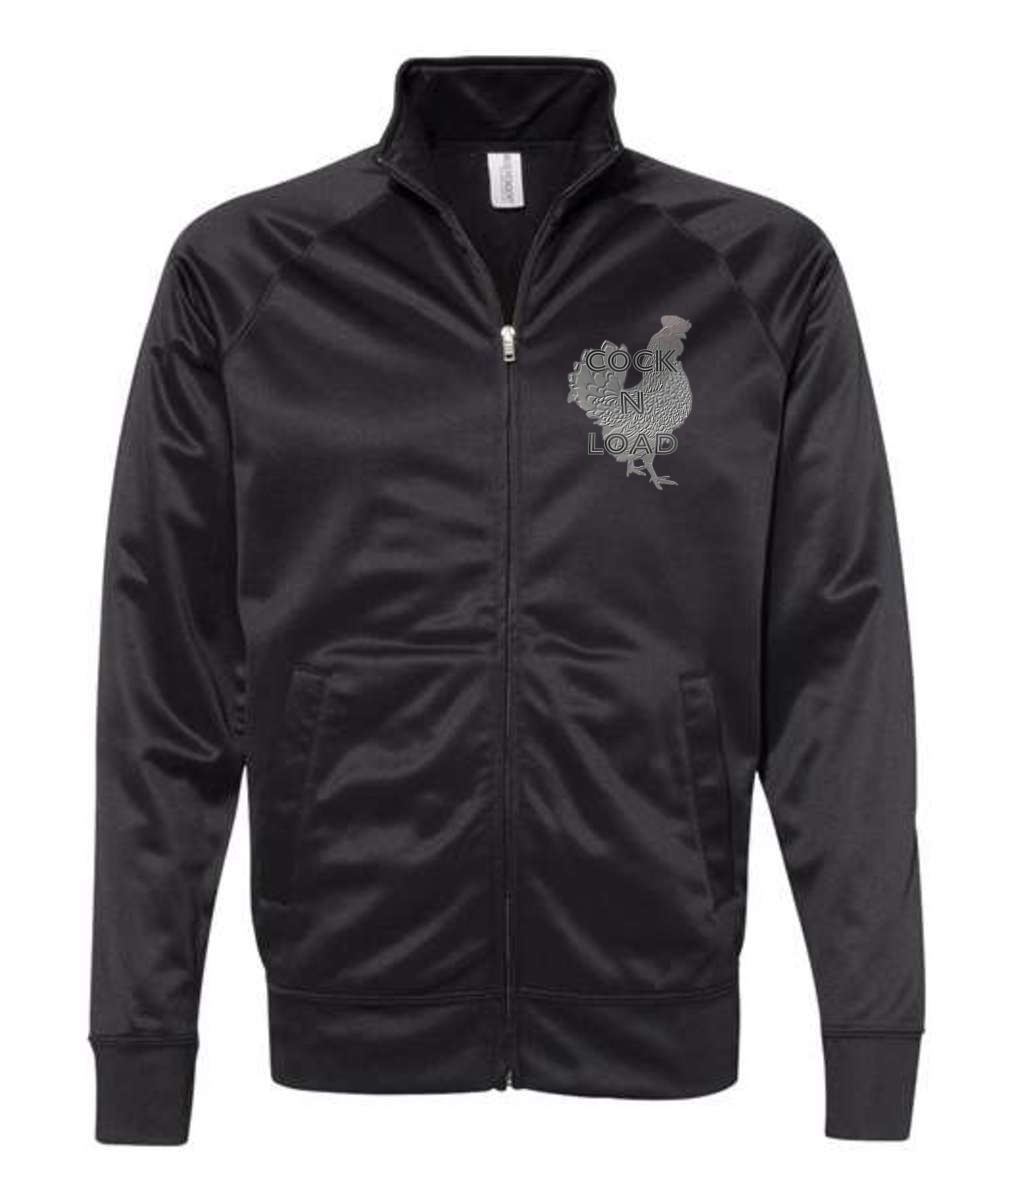 Cock n load Embroidered Independent Trading Co. - Unisex Lightweight Poly-Tech Full-Zip Track Jacket or Similar